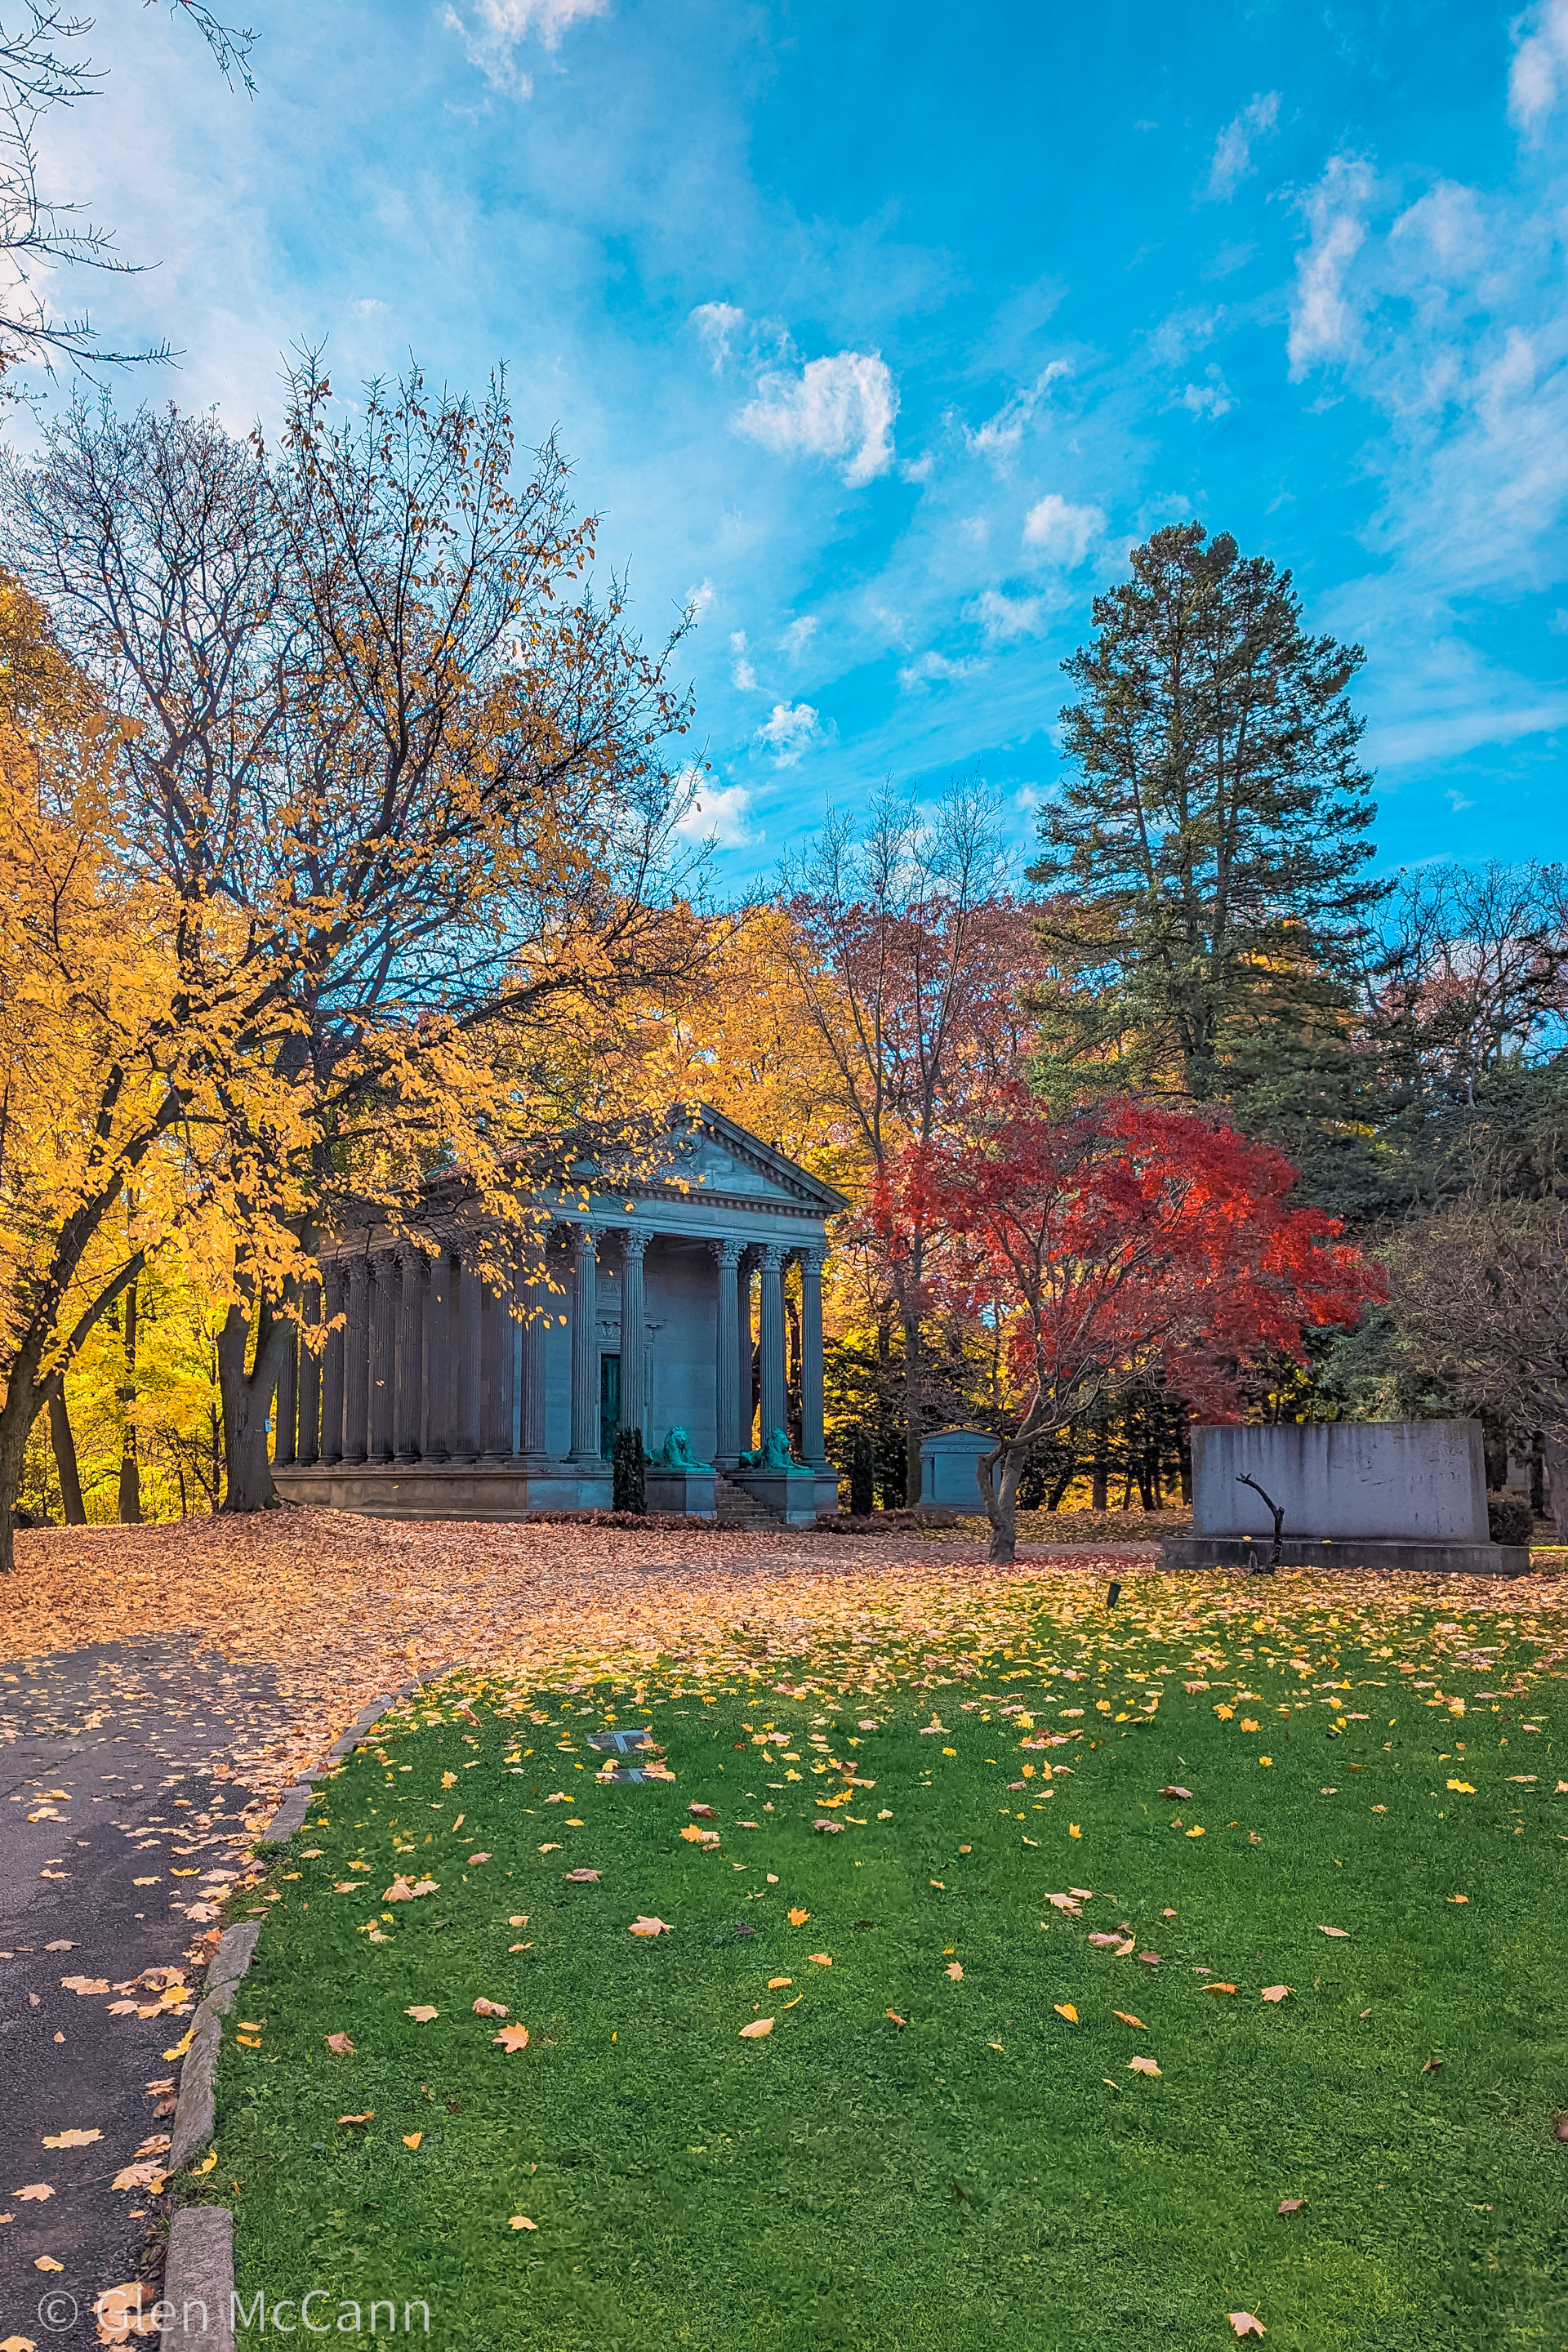 Photo of a mausoleum in a large cemetery in the fall.